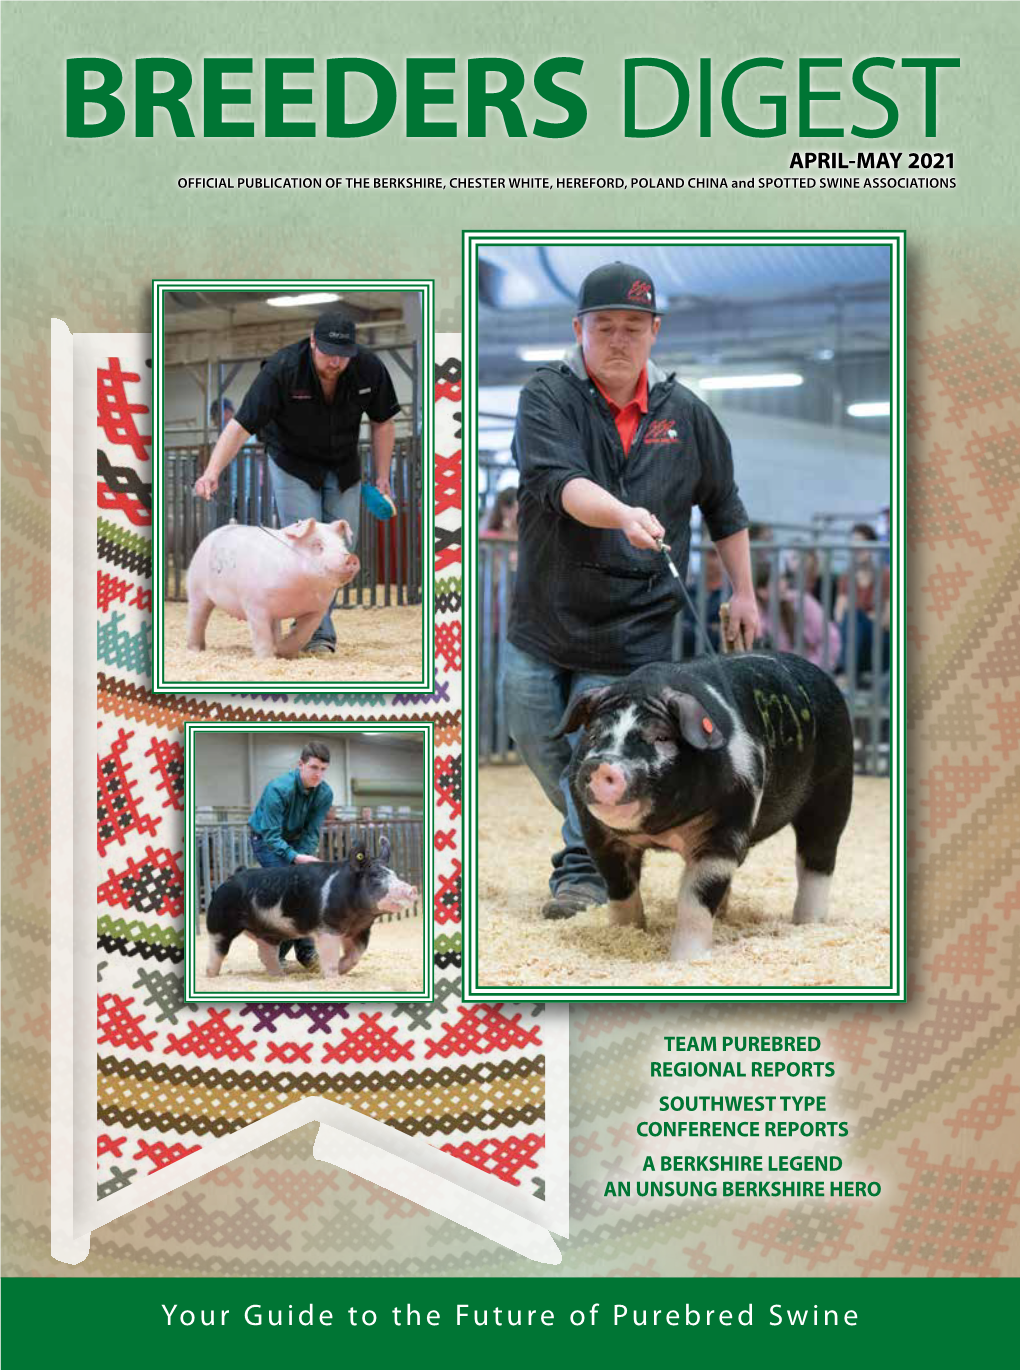 BREEDERS DIGEST APRIL-MAY 2021 OFFICIAL PUBLICATION of the BERKSHIRE, CHESTER WHITE, HEREFORD, POLAND CHINA and SPOTTED SWINE ASSOCIATIONS